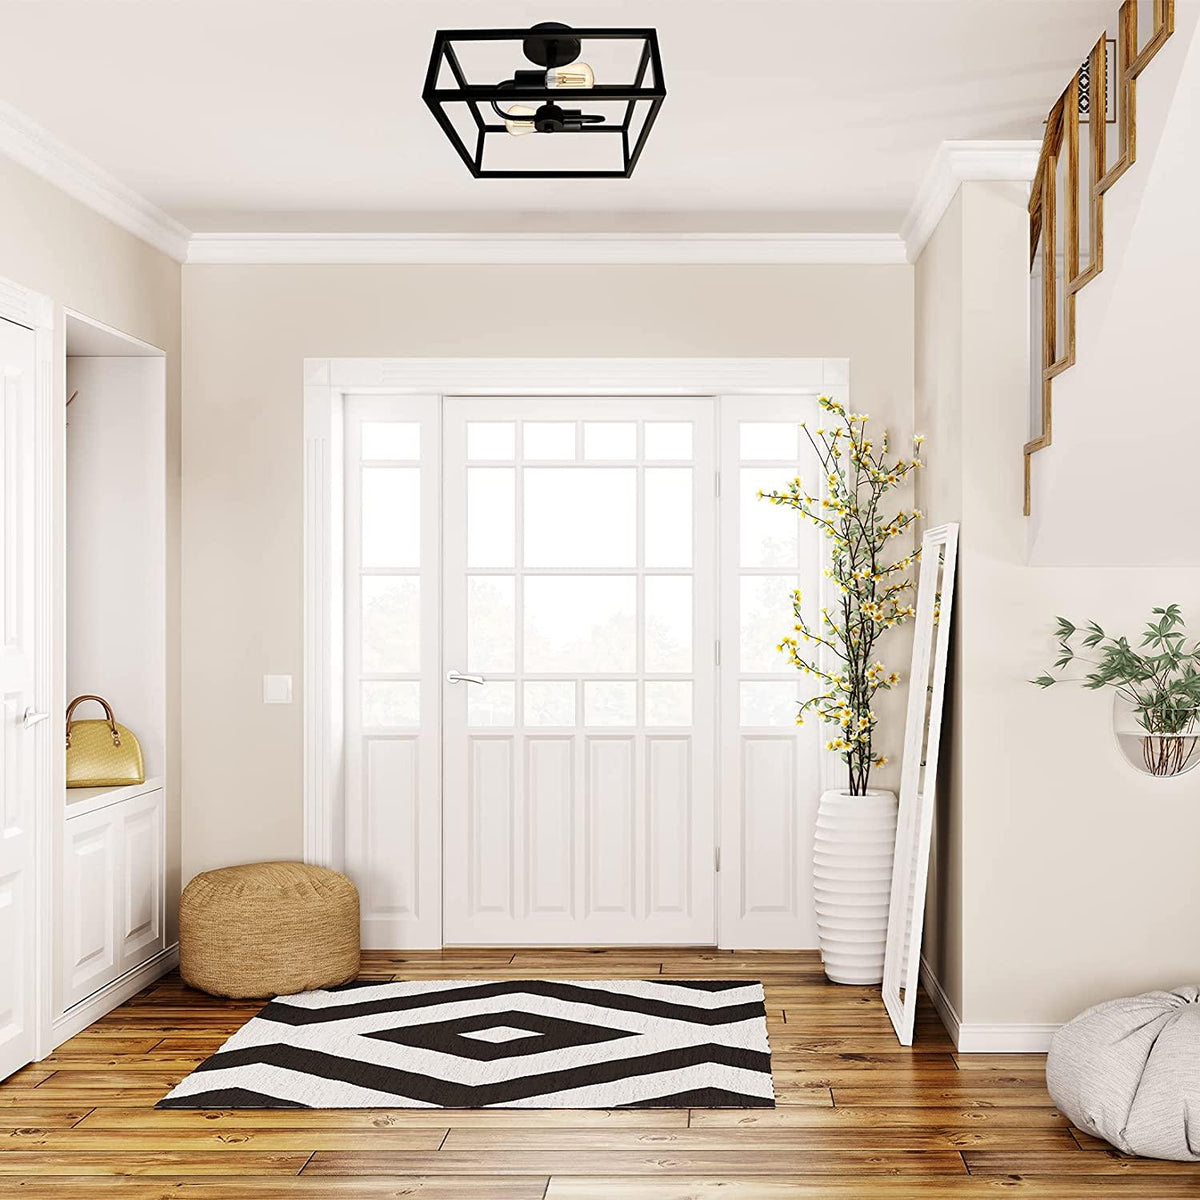 Black square ceiling mounted light with 2 light by entryway